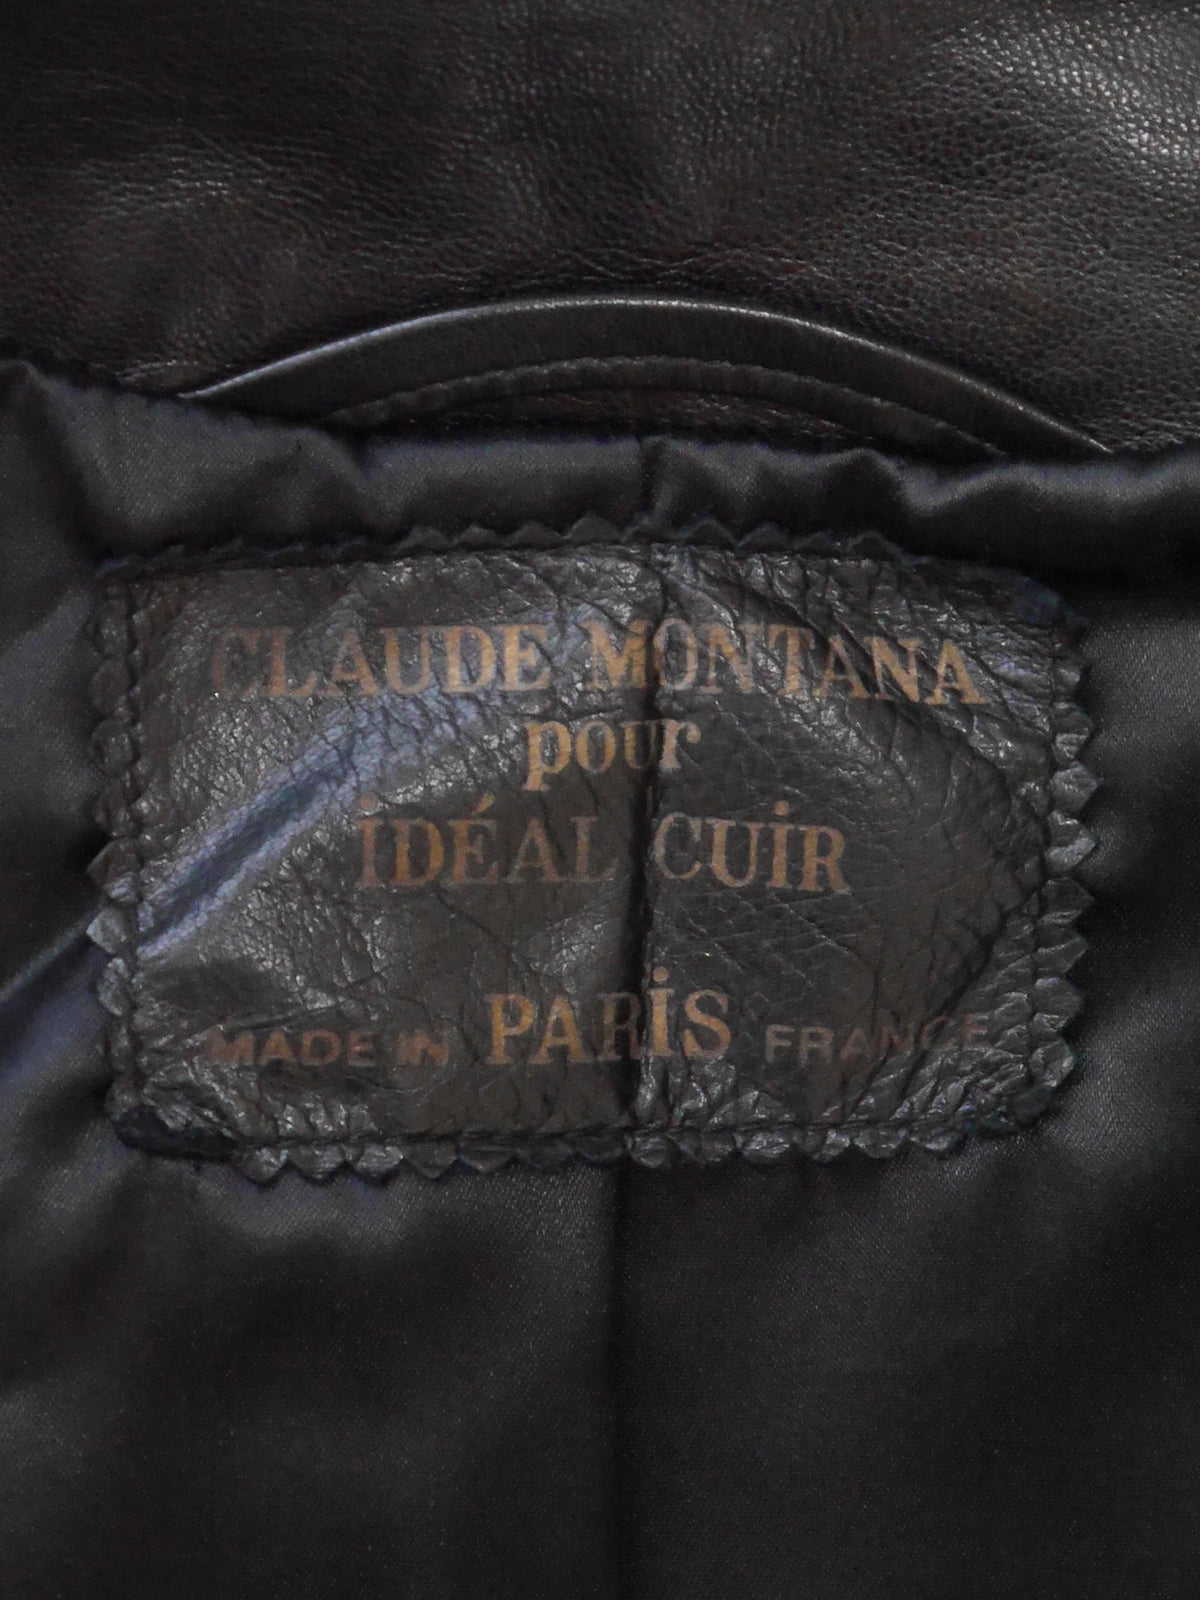 CLAUDE MONTANA Spring 1984 Vintage Cropped Leather Jacket w/ Oversized Shoulders